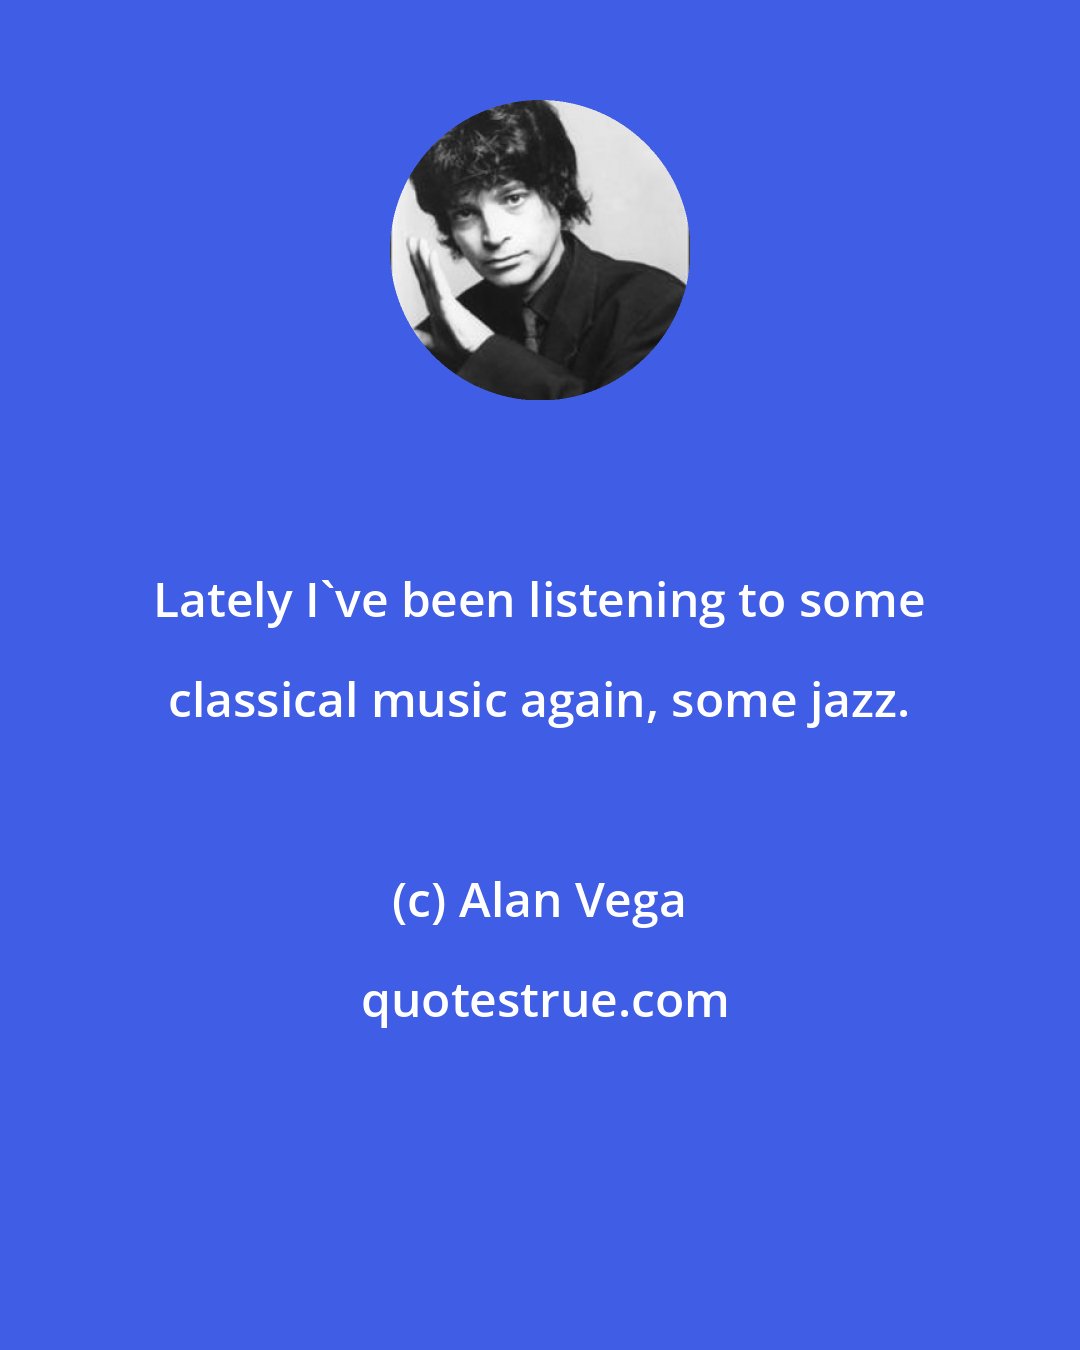 Alan Vega: Lately I've been listening to some classical music again, some jazz.